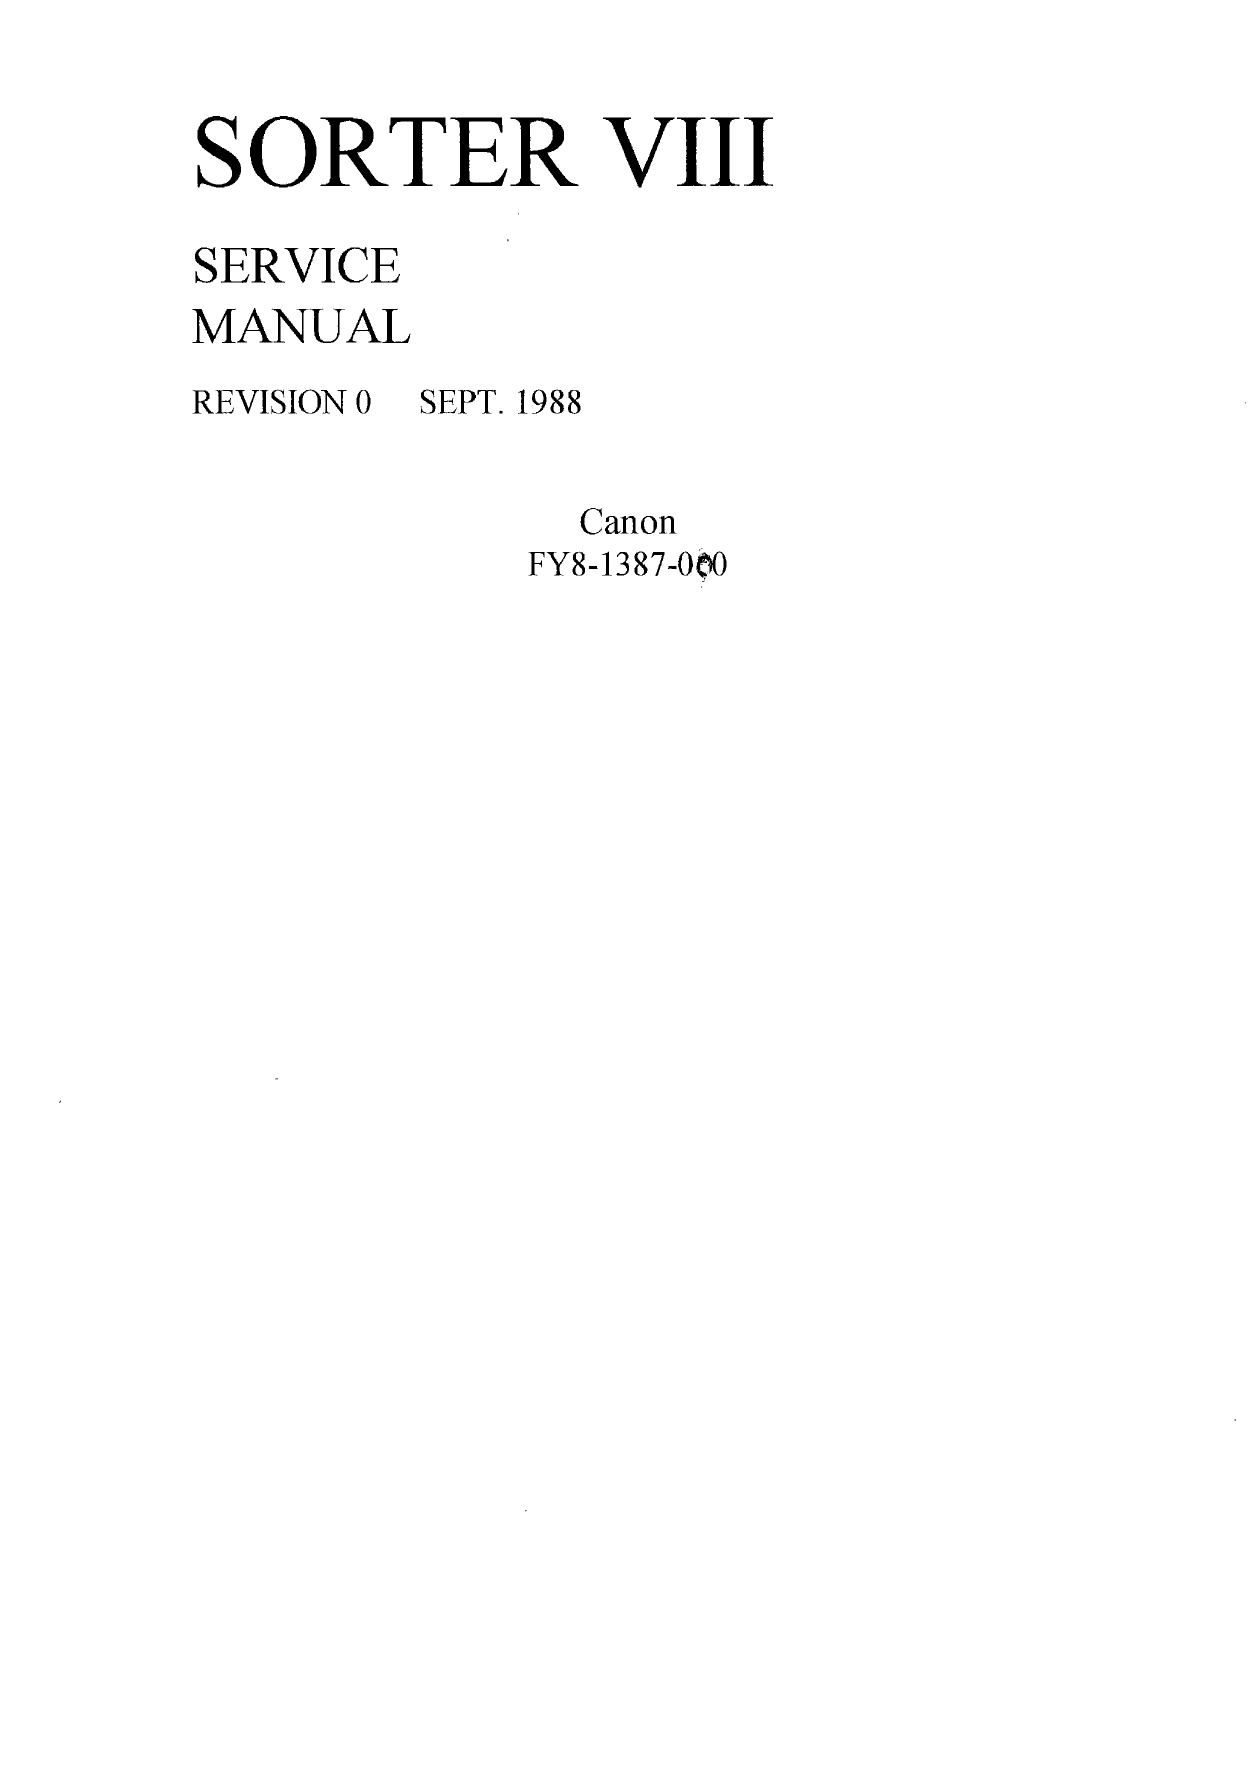 Canon Options Sorter-VIII Parts and Service Manual-1